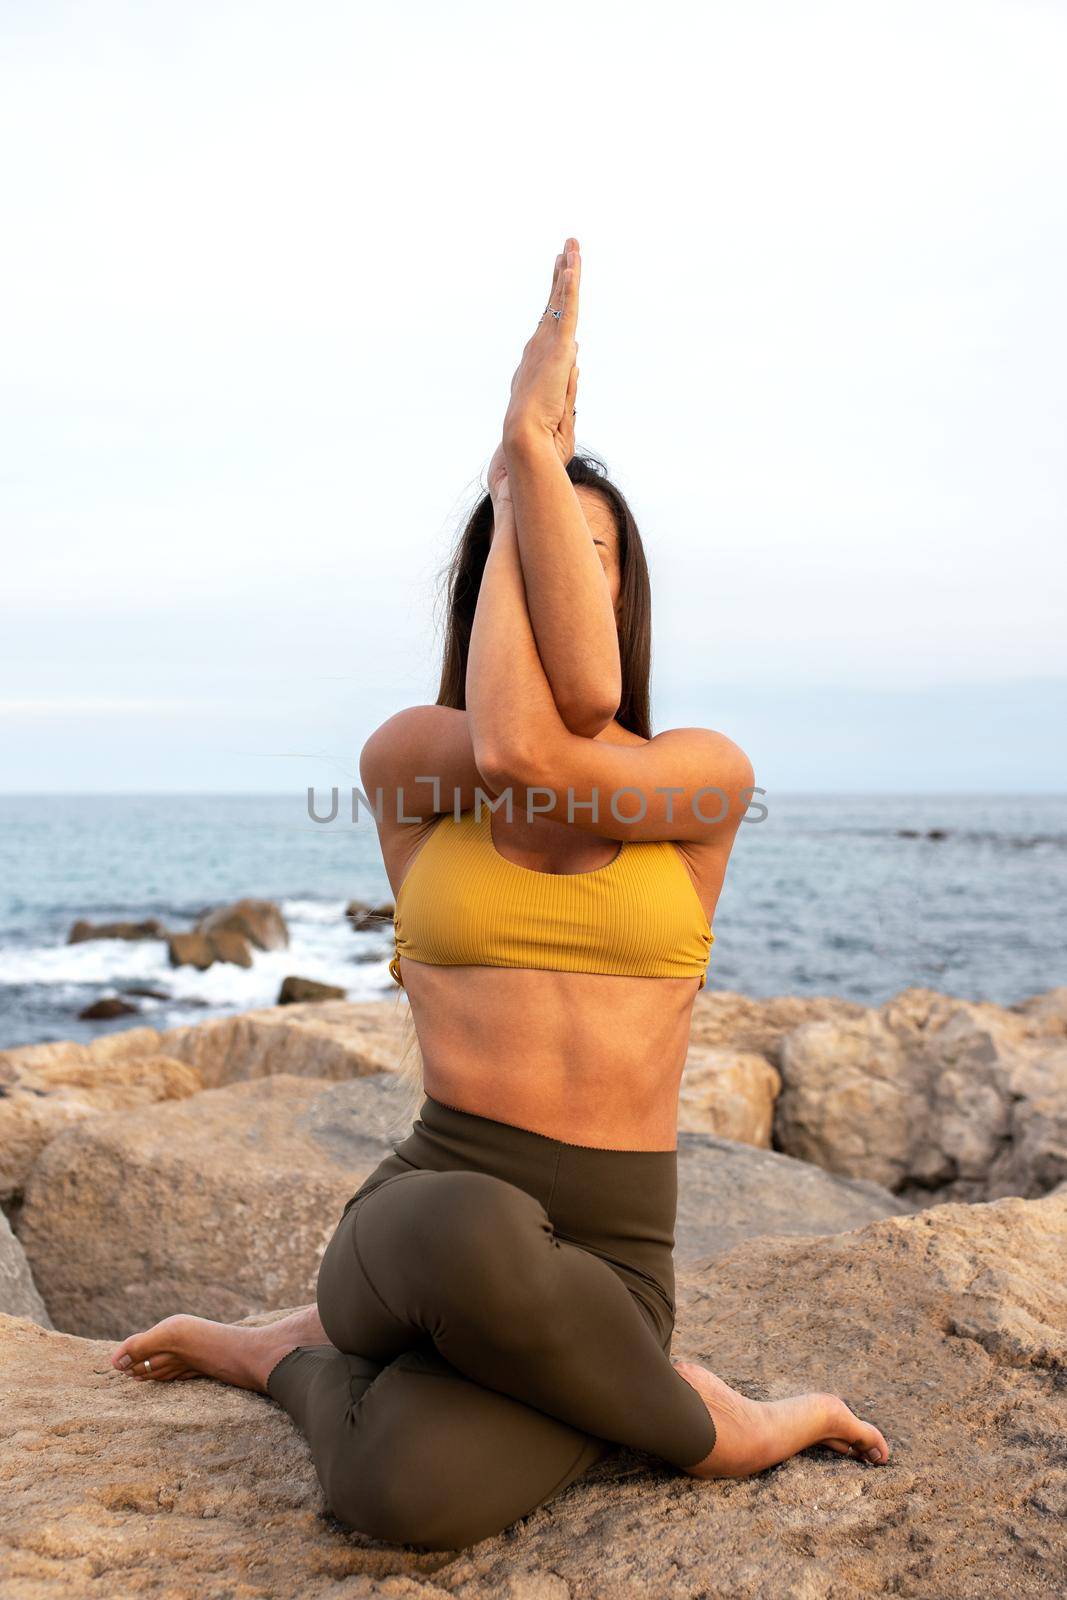 Unrecognizable woman doing gomukhasana with garudasana arms. Yoga practice in nature near the ocean. Vertical image. Healthy lifestyle and spirituality concept.